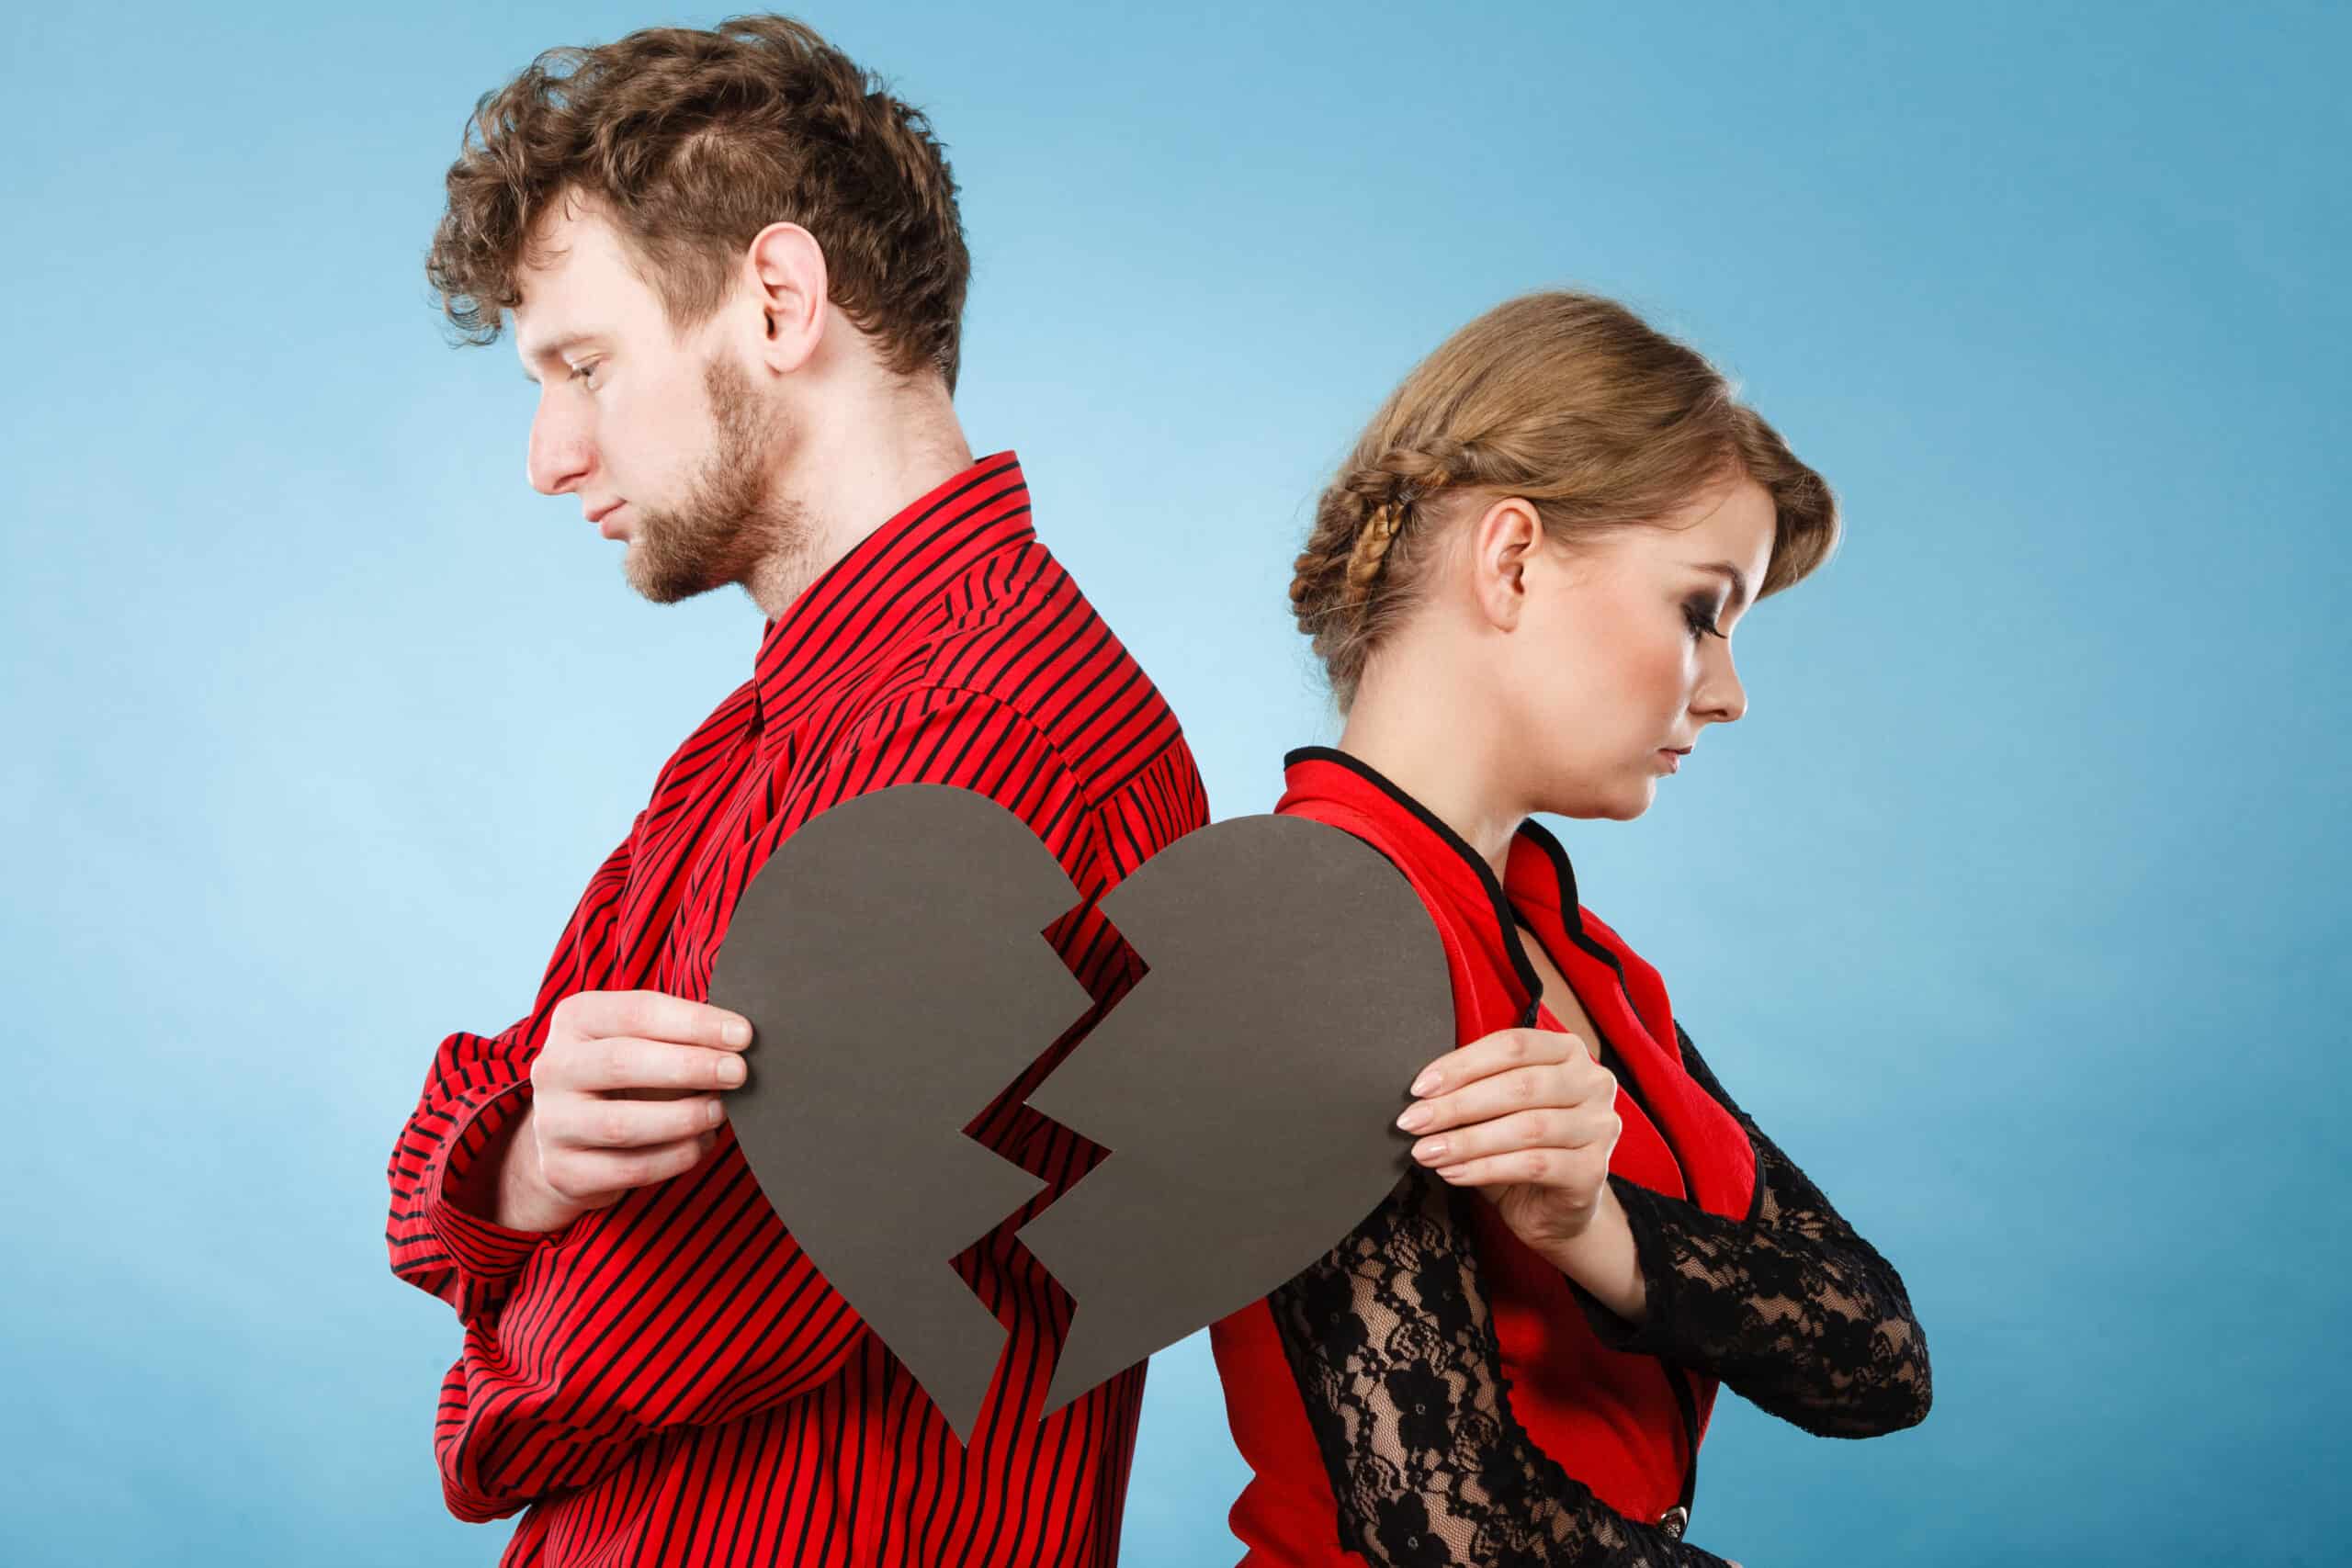 Men get more emotionally crushed than women after a breakup